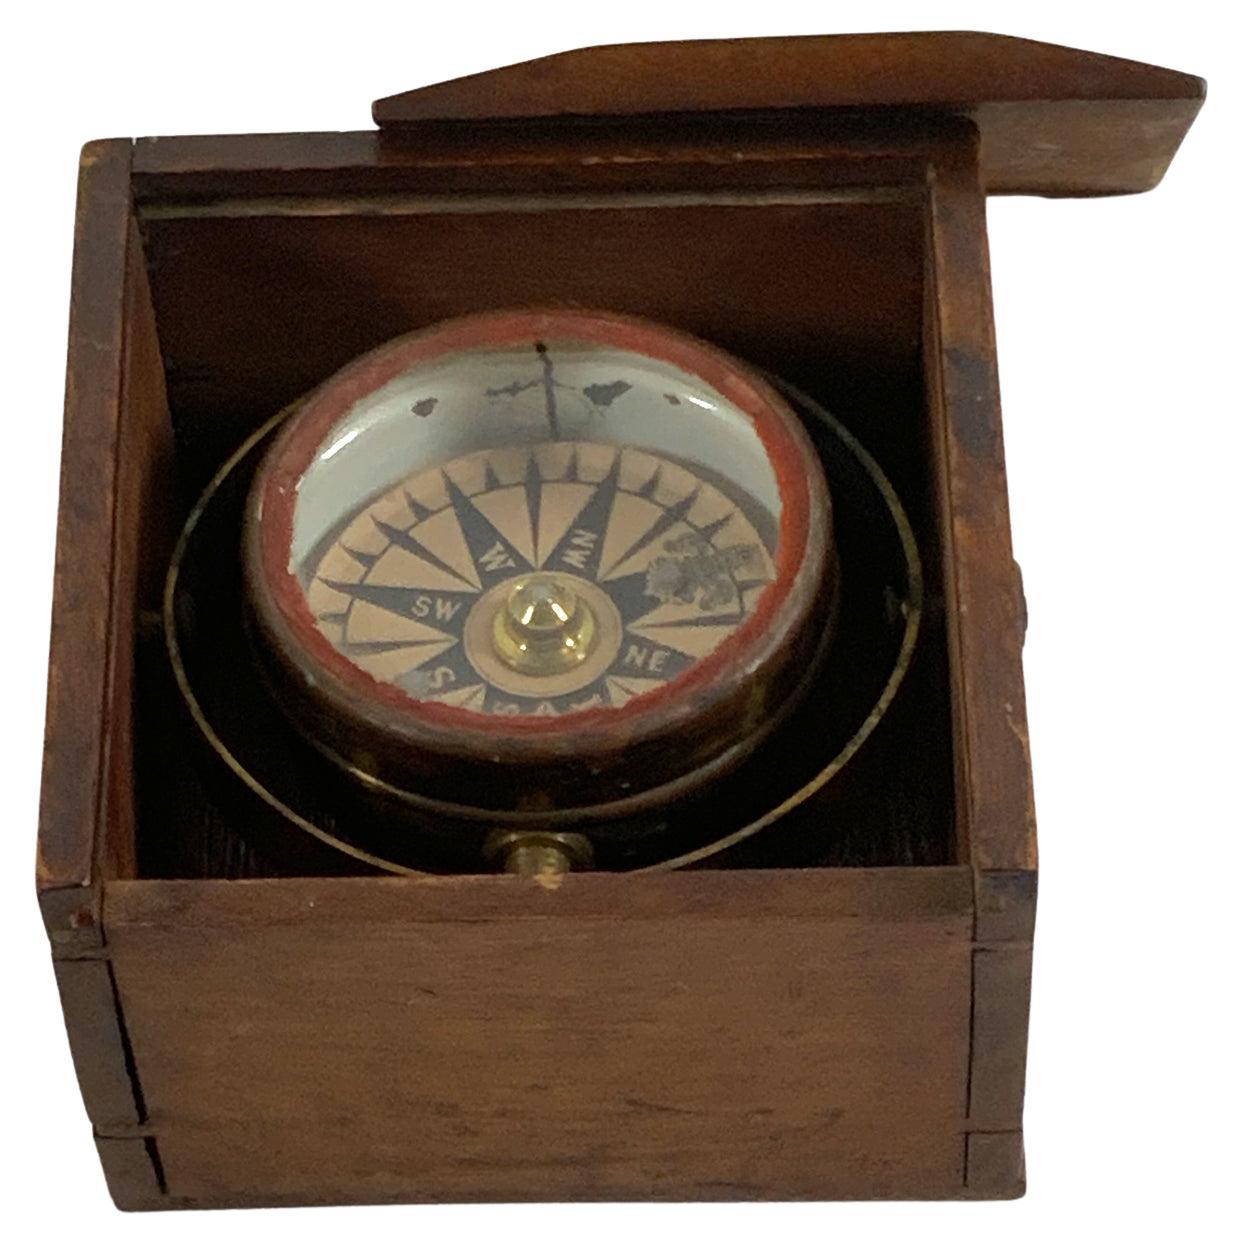 Details about   Antique Handmade Maritime Nautical Compass Marine Collectible Compass With Box 